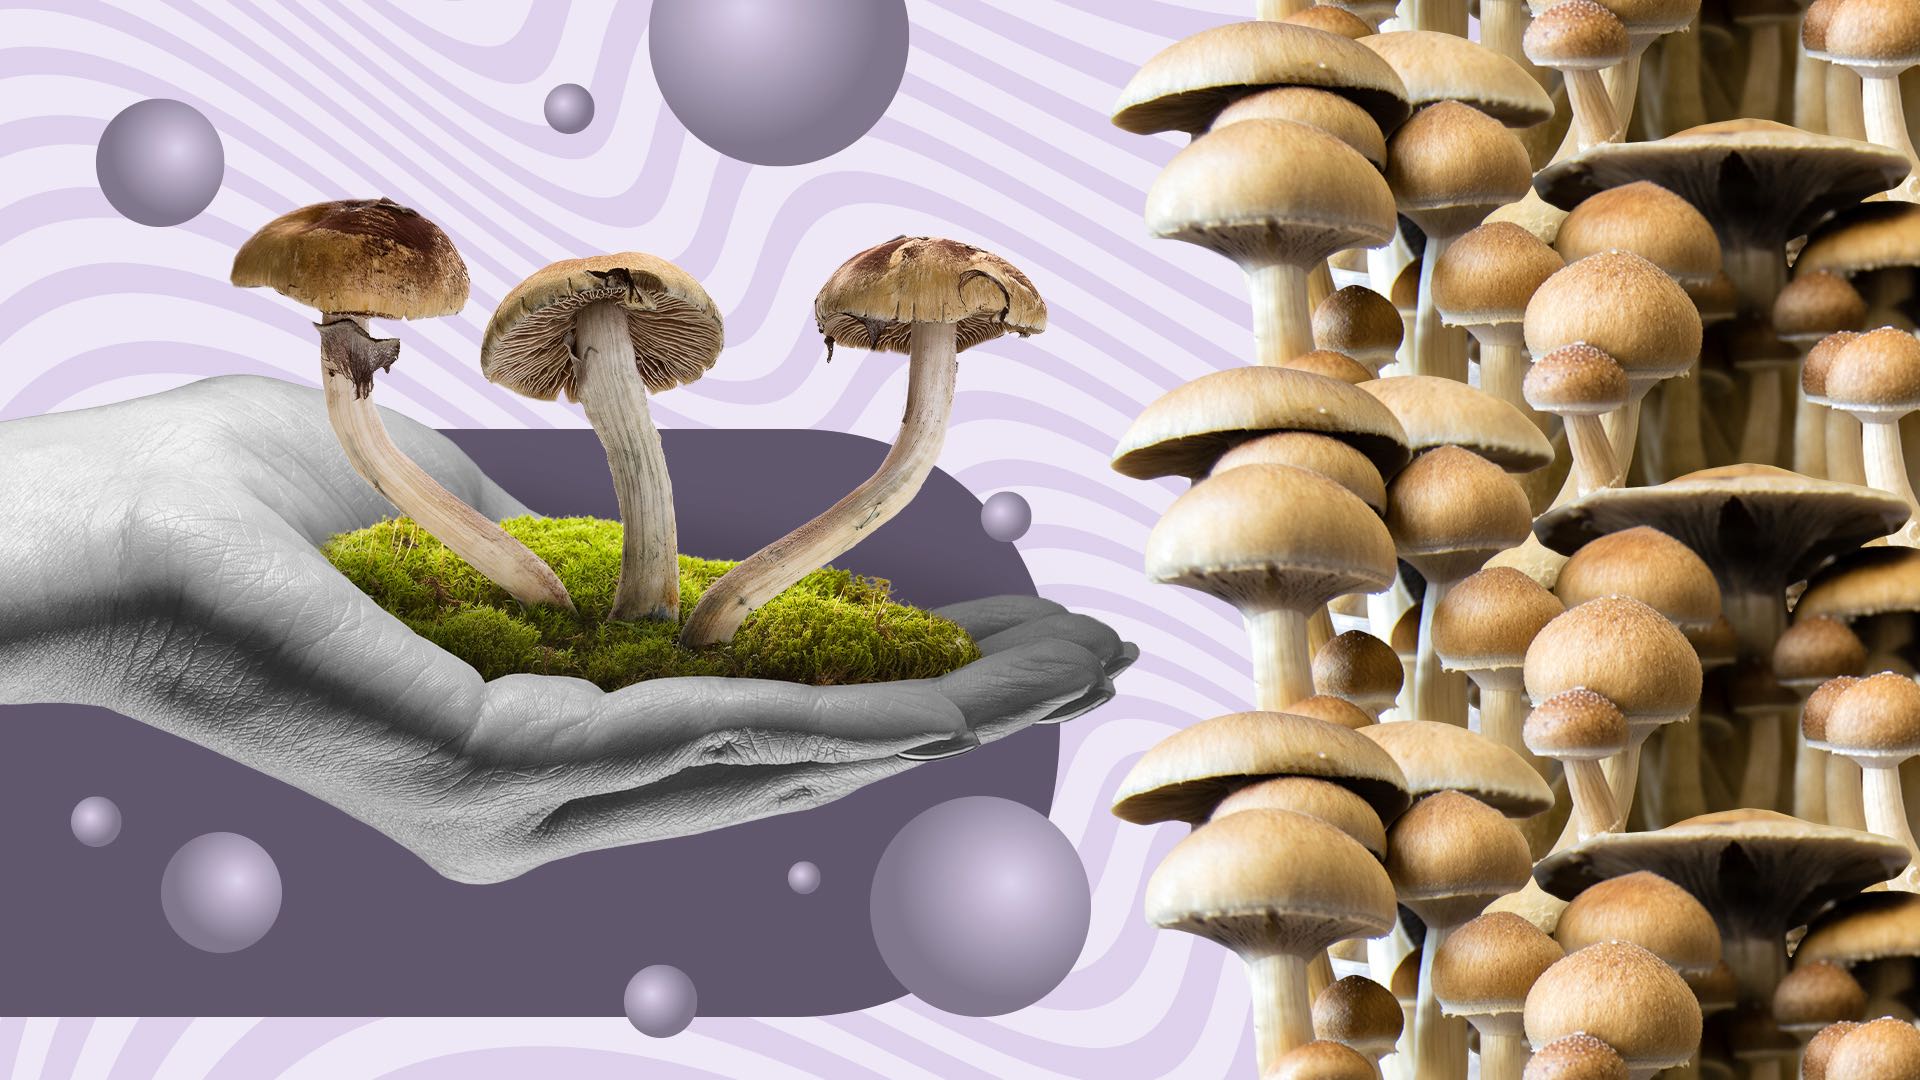 How to grow psychedelic shrooms for the first time | Leafly